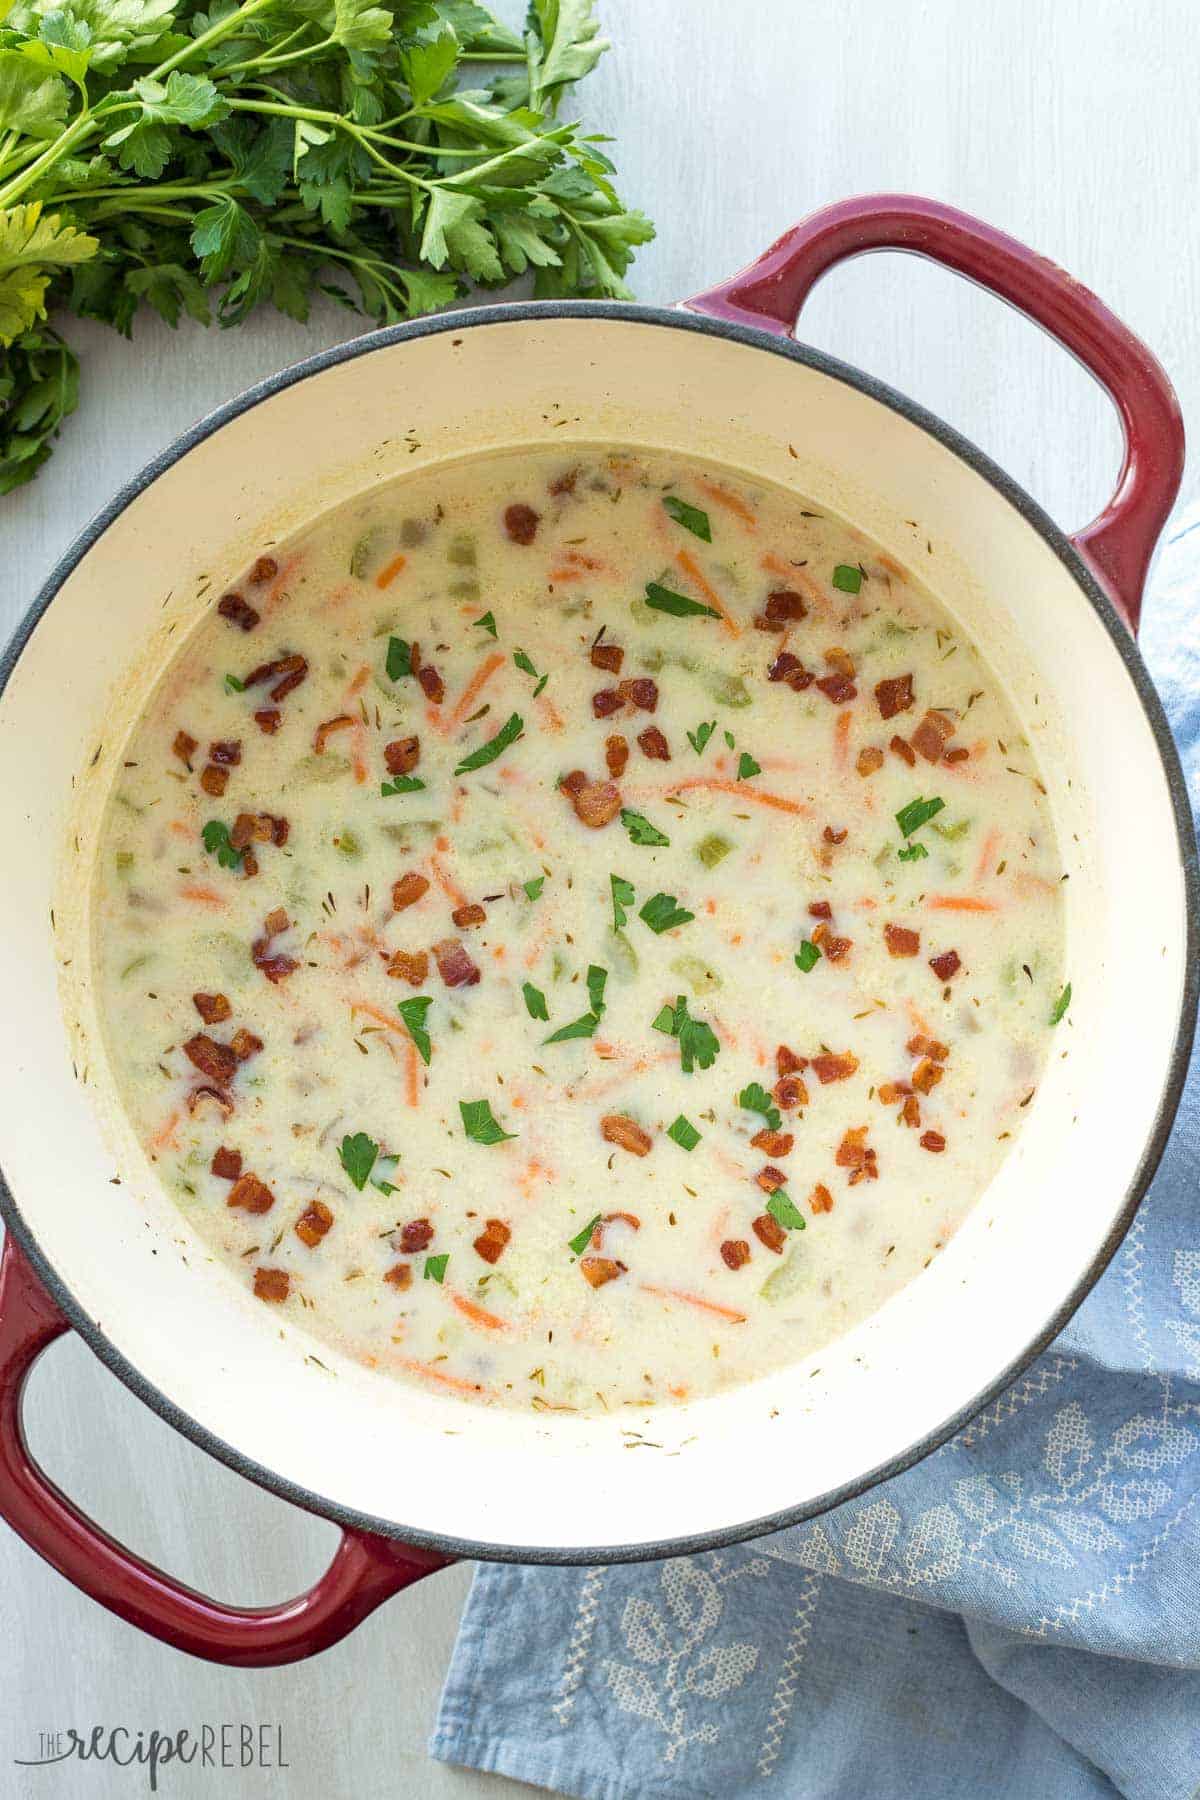 red and white dutch oven with quick chicken bacon rice soup and fresh parsley on the side